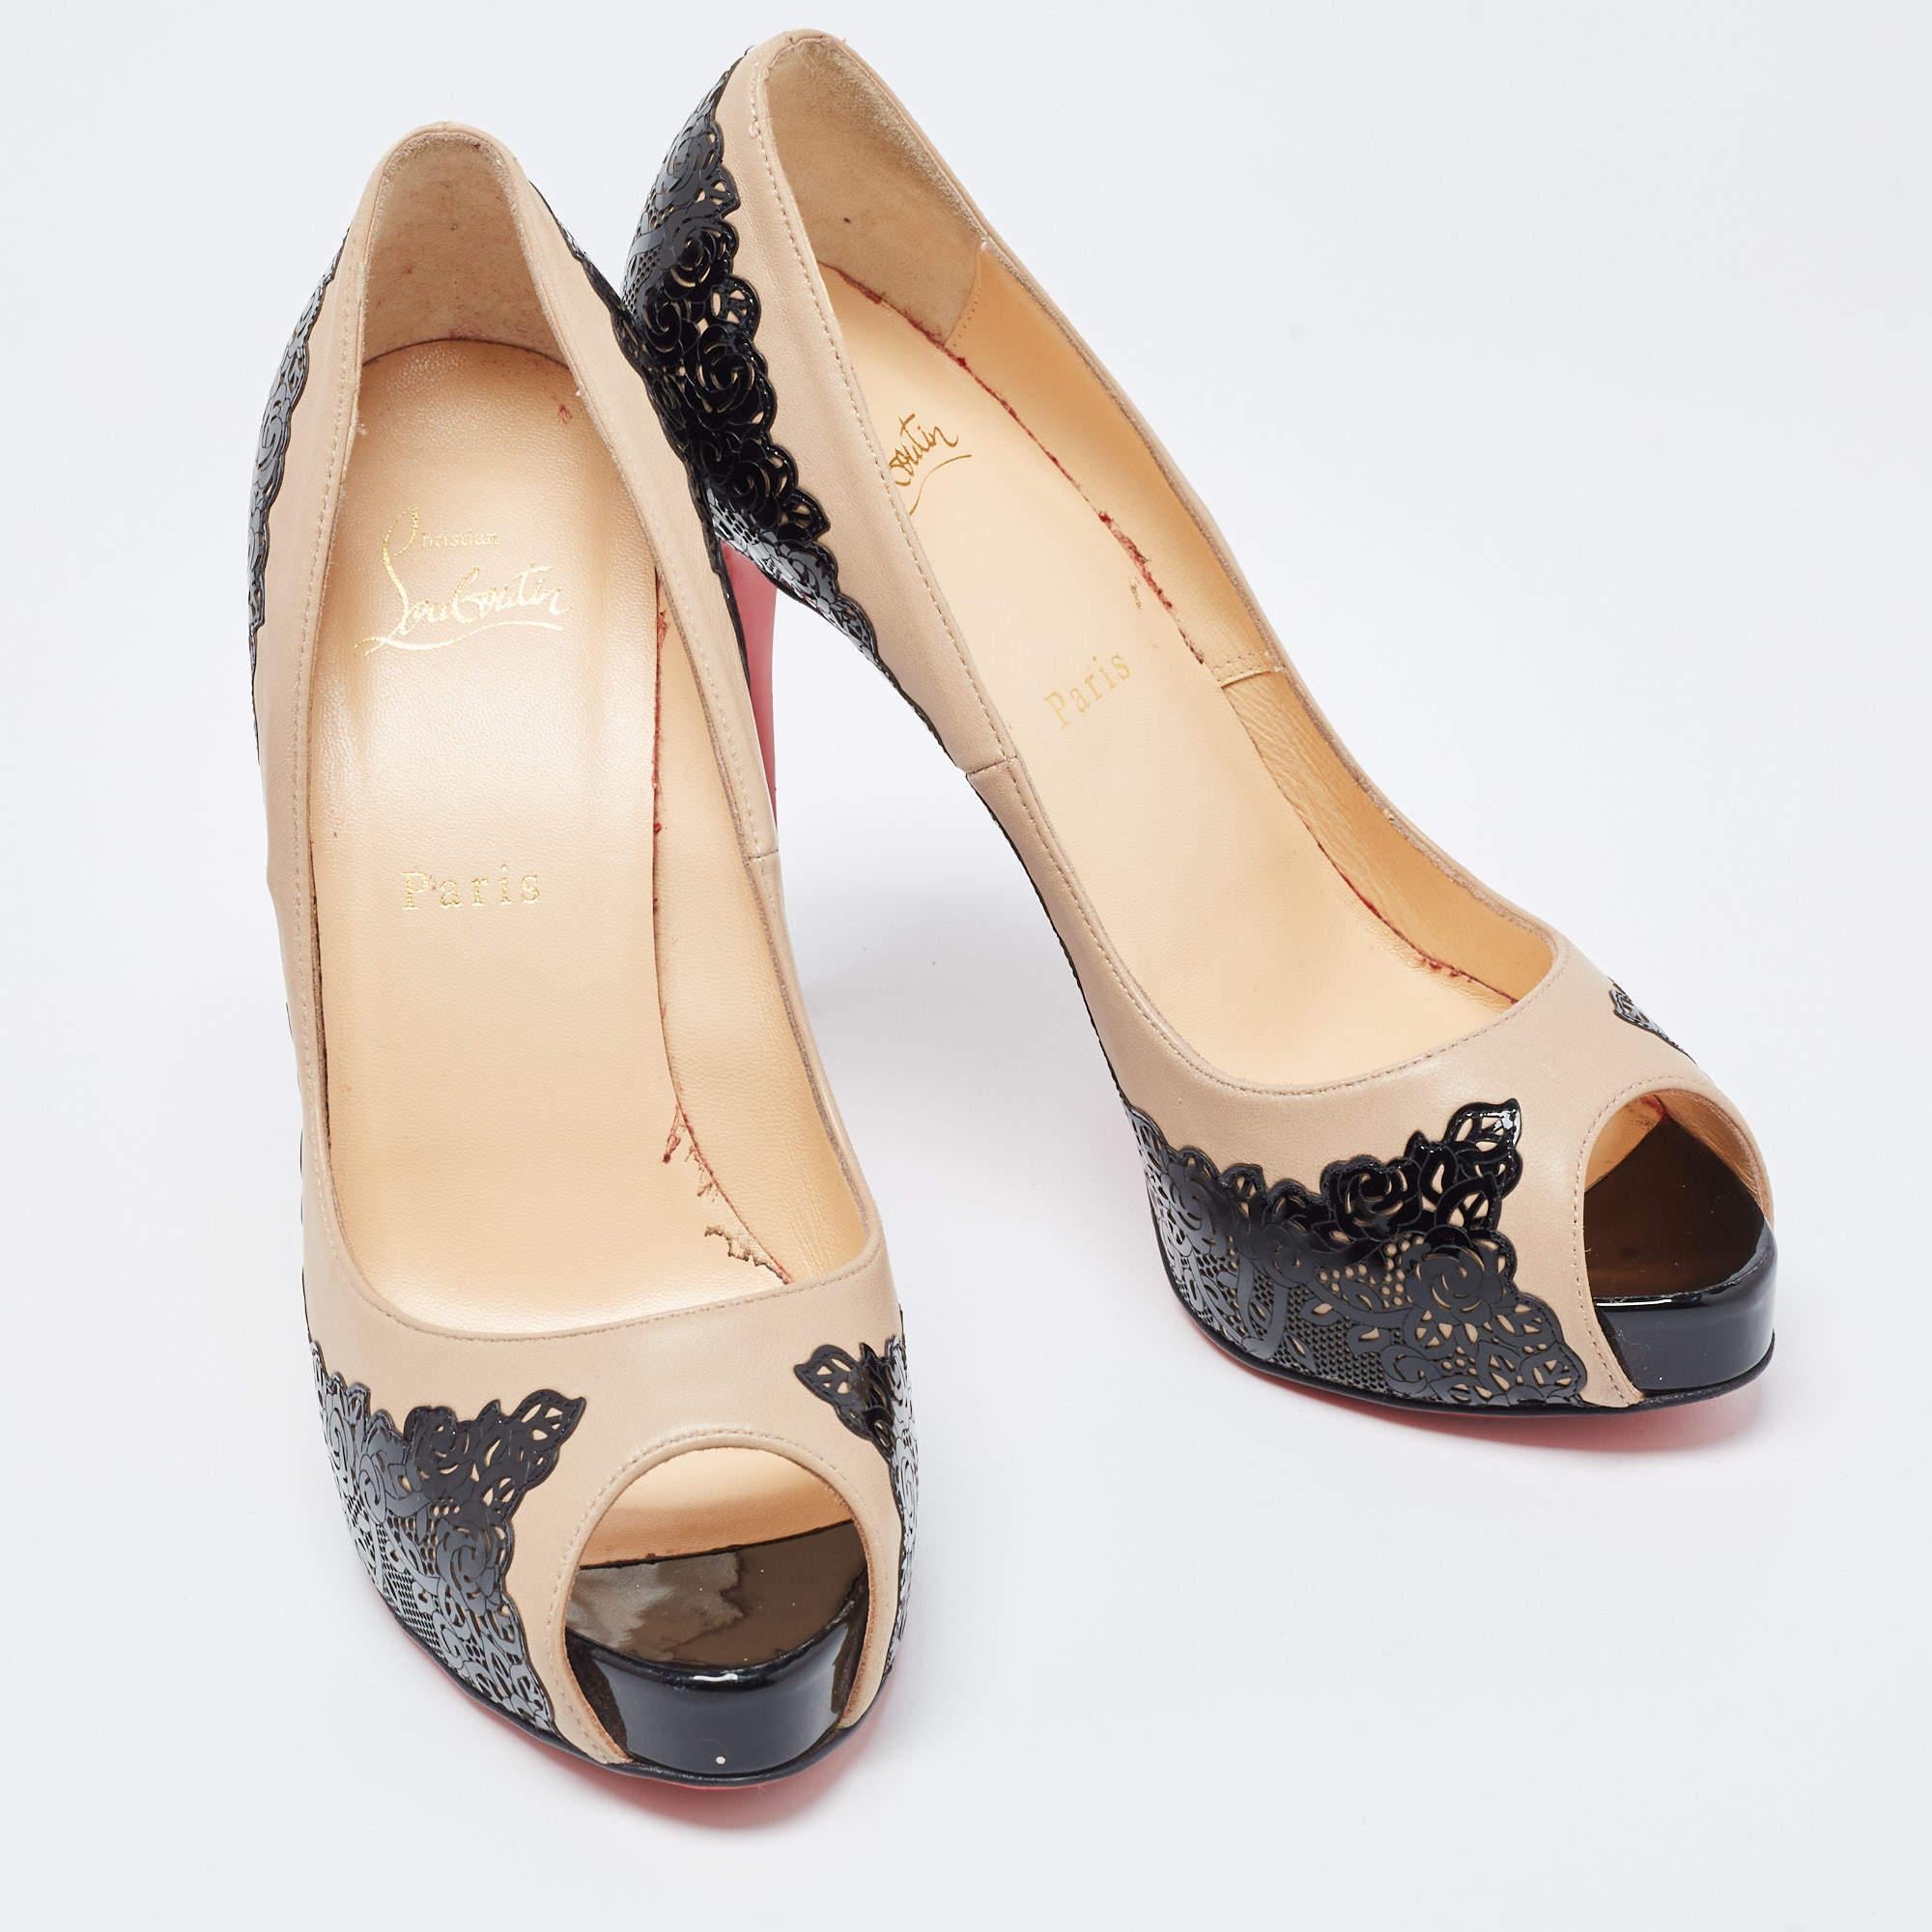 Women's Christian Louboutin Laser Cut and Leather Veramucha Peep Toe Pumps Size 39 For Sale